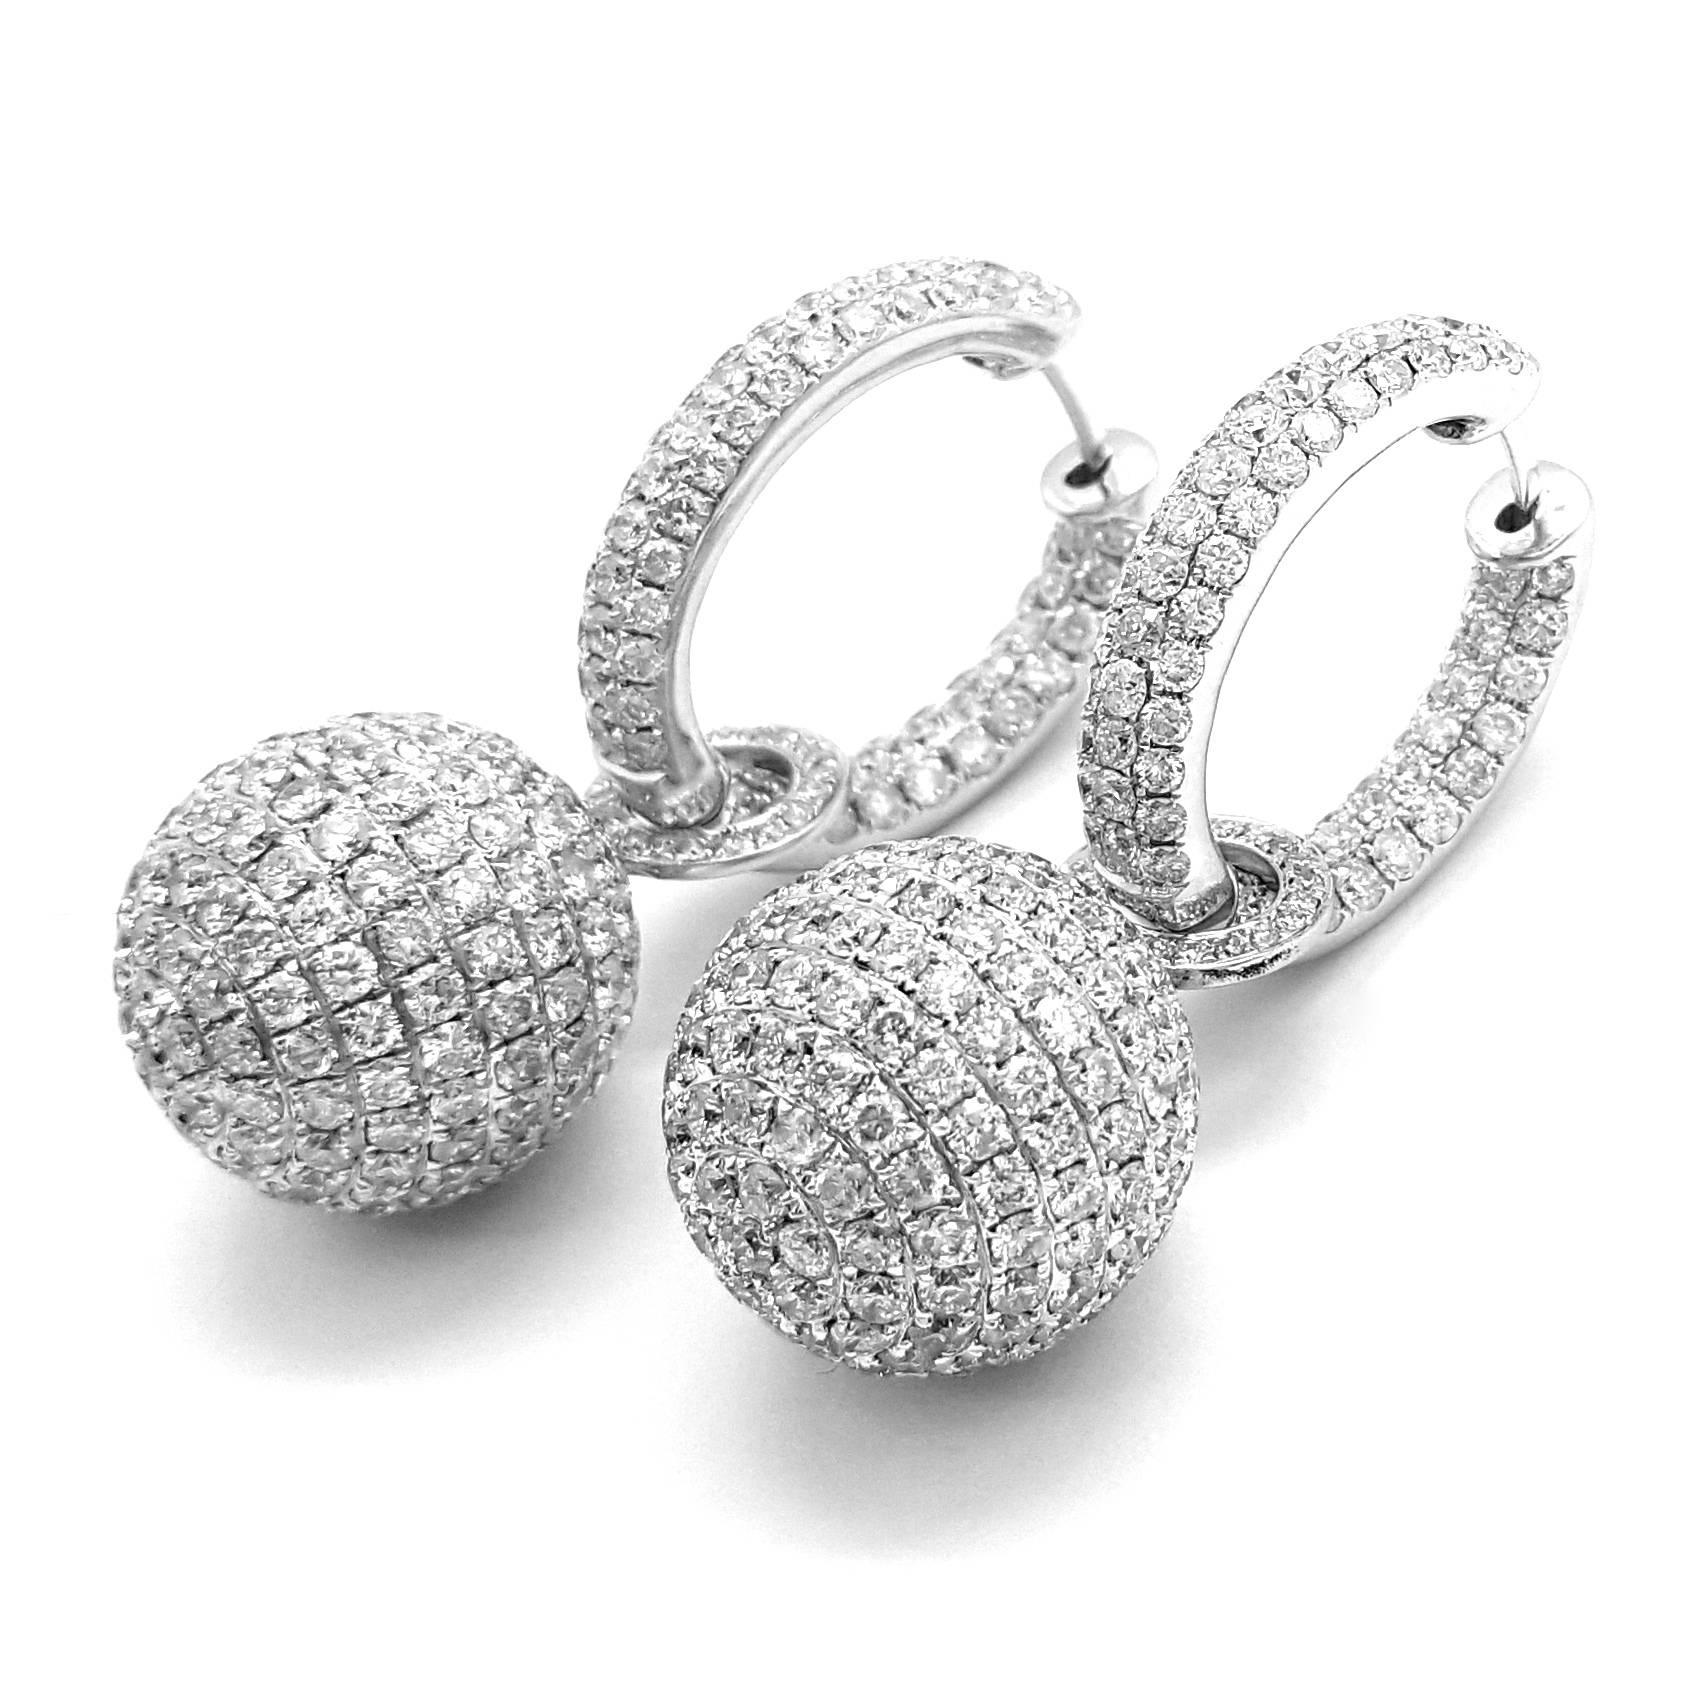 This is the real thing! These beautiful inside/outside diamond hoop earrings are crafted in 18k white gold. The earrings are pave set in three rows with 77 round brilliant cut diamonds each, for a total weight of 3.30cts. The stunning earring